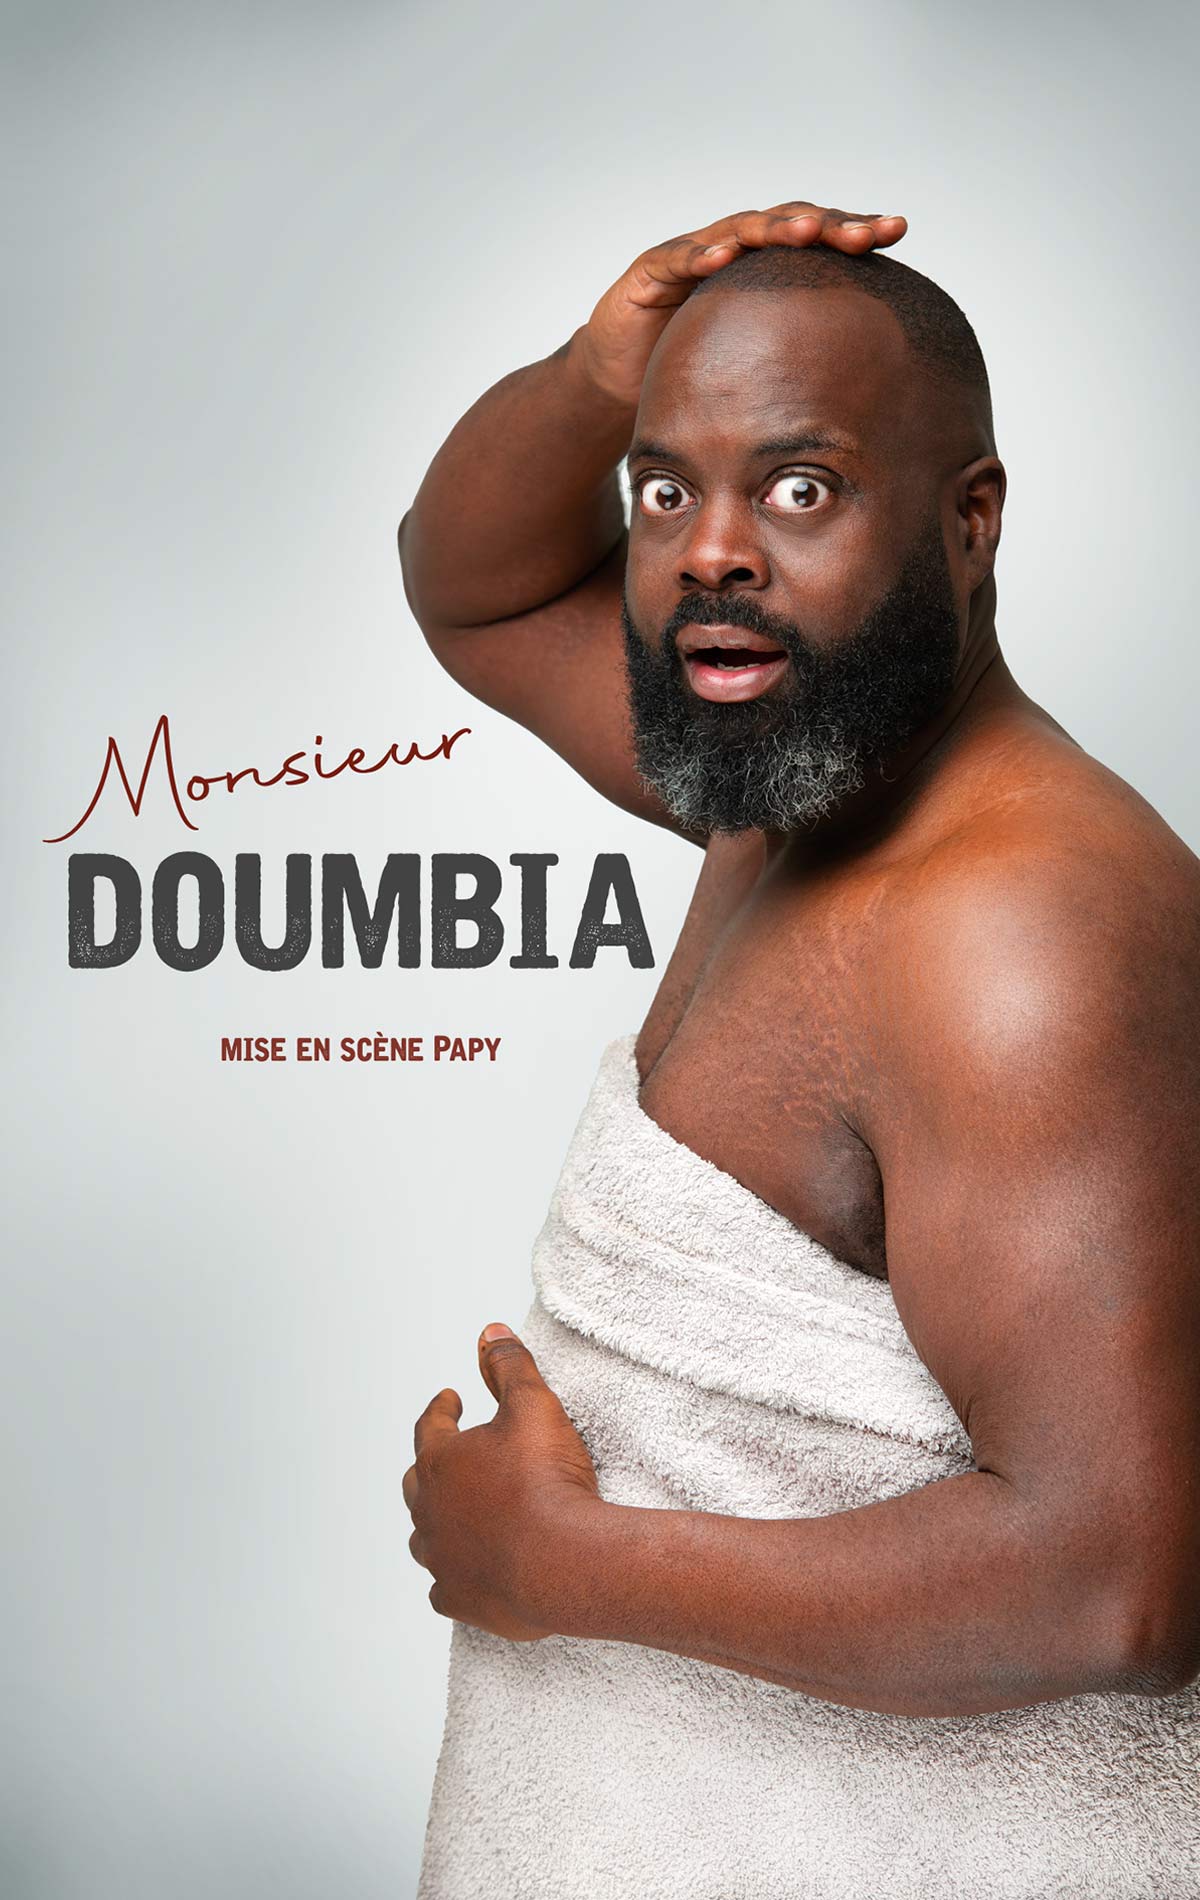 Issa Doumbia at Espace Dollfus Et Noack Tickets